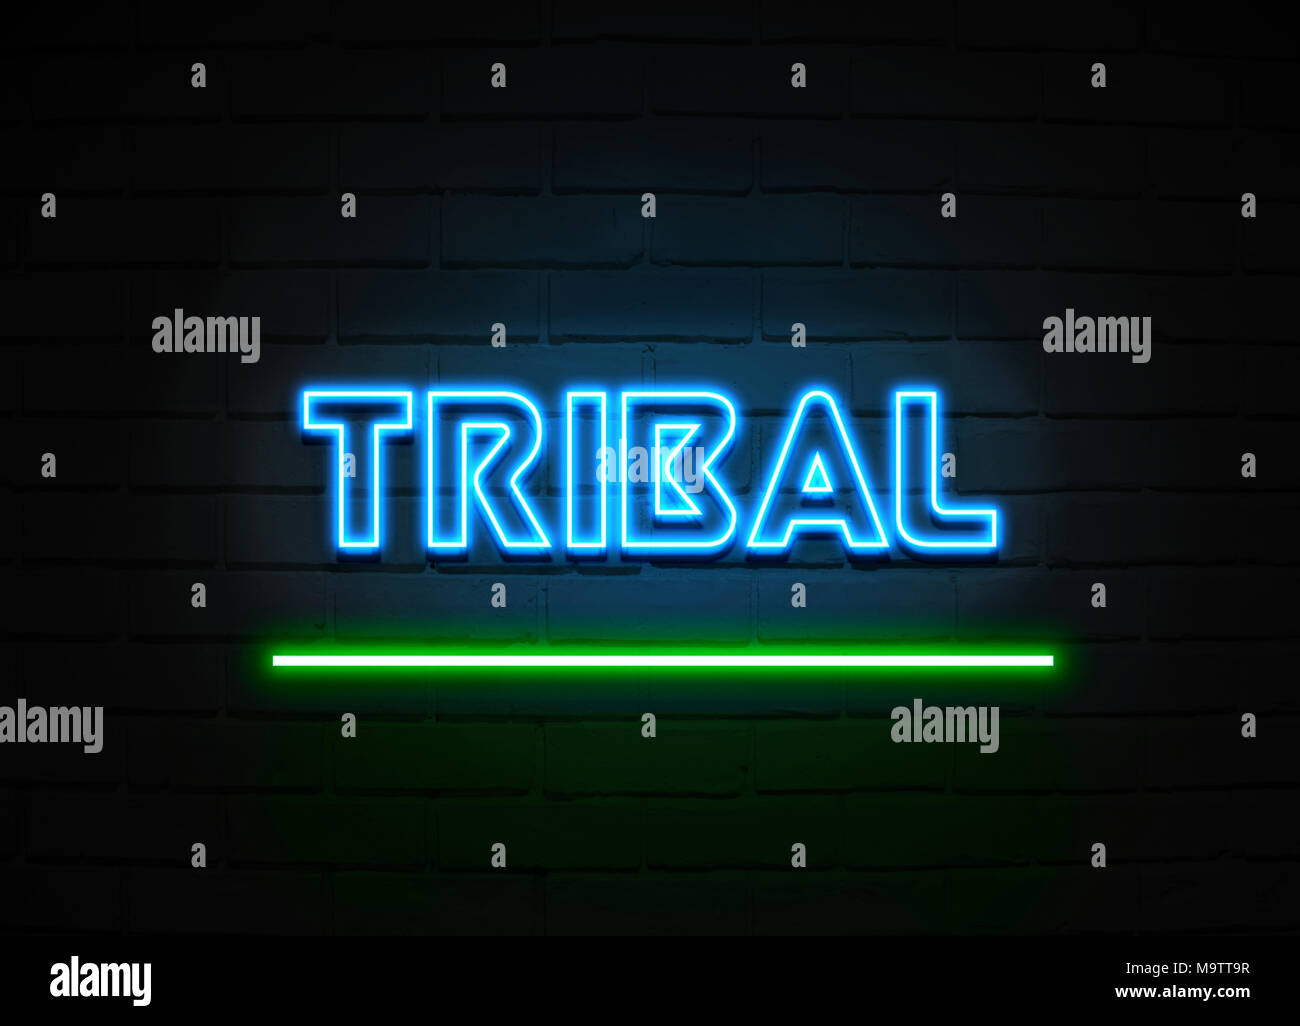 Tribal neon sign - Glowing Neon Sign on brickwall wall - 3D rendered royalty free stock illustration. Stock Photo